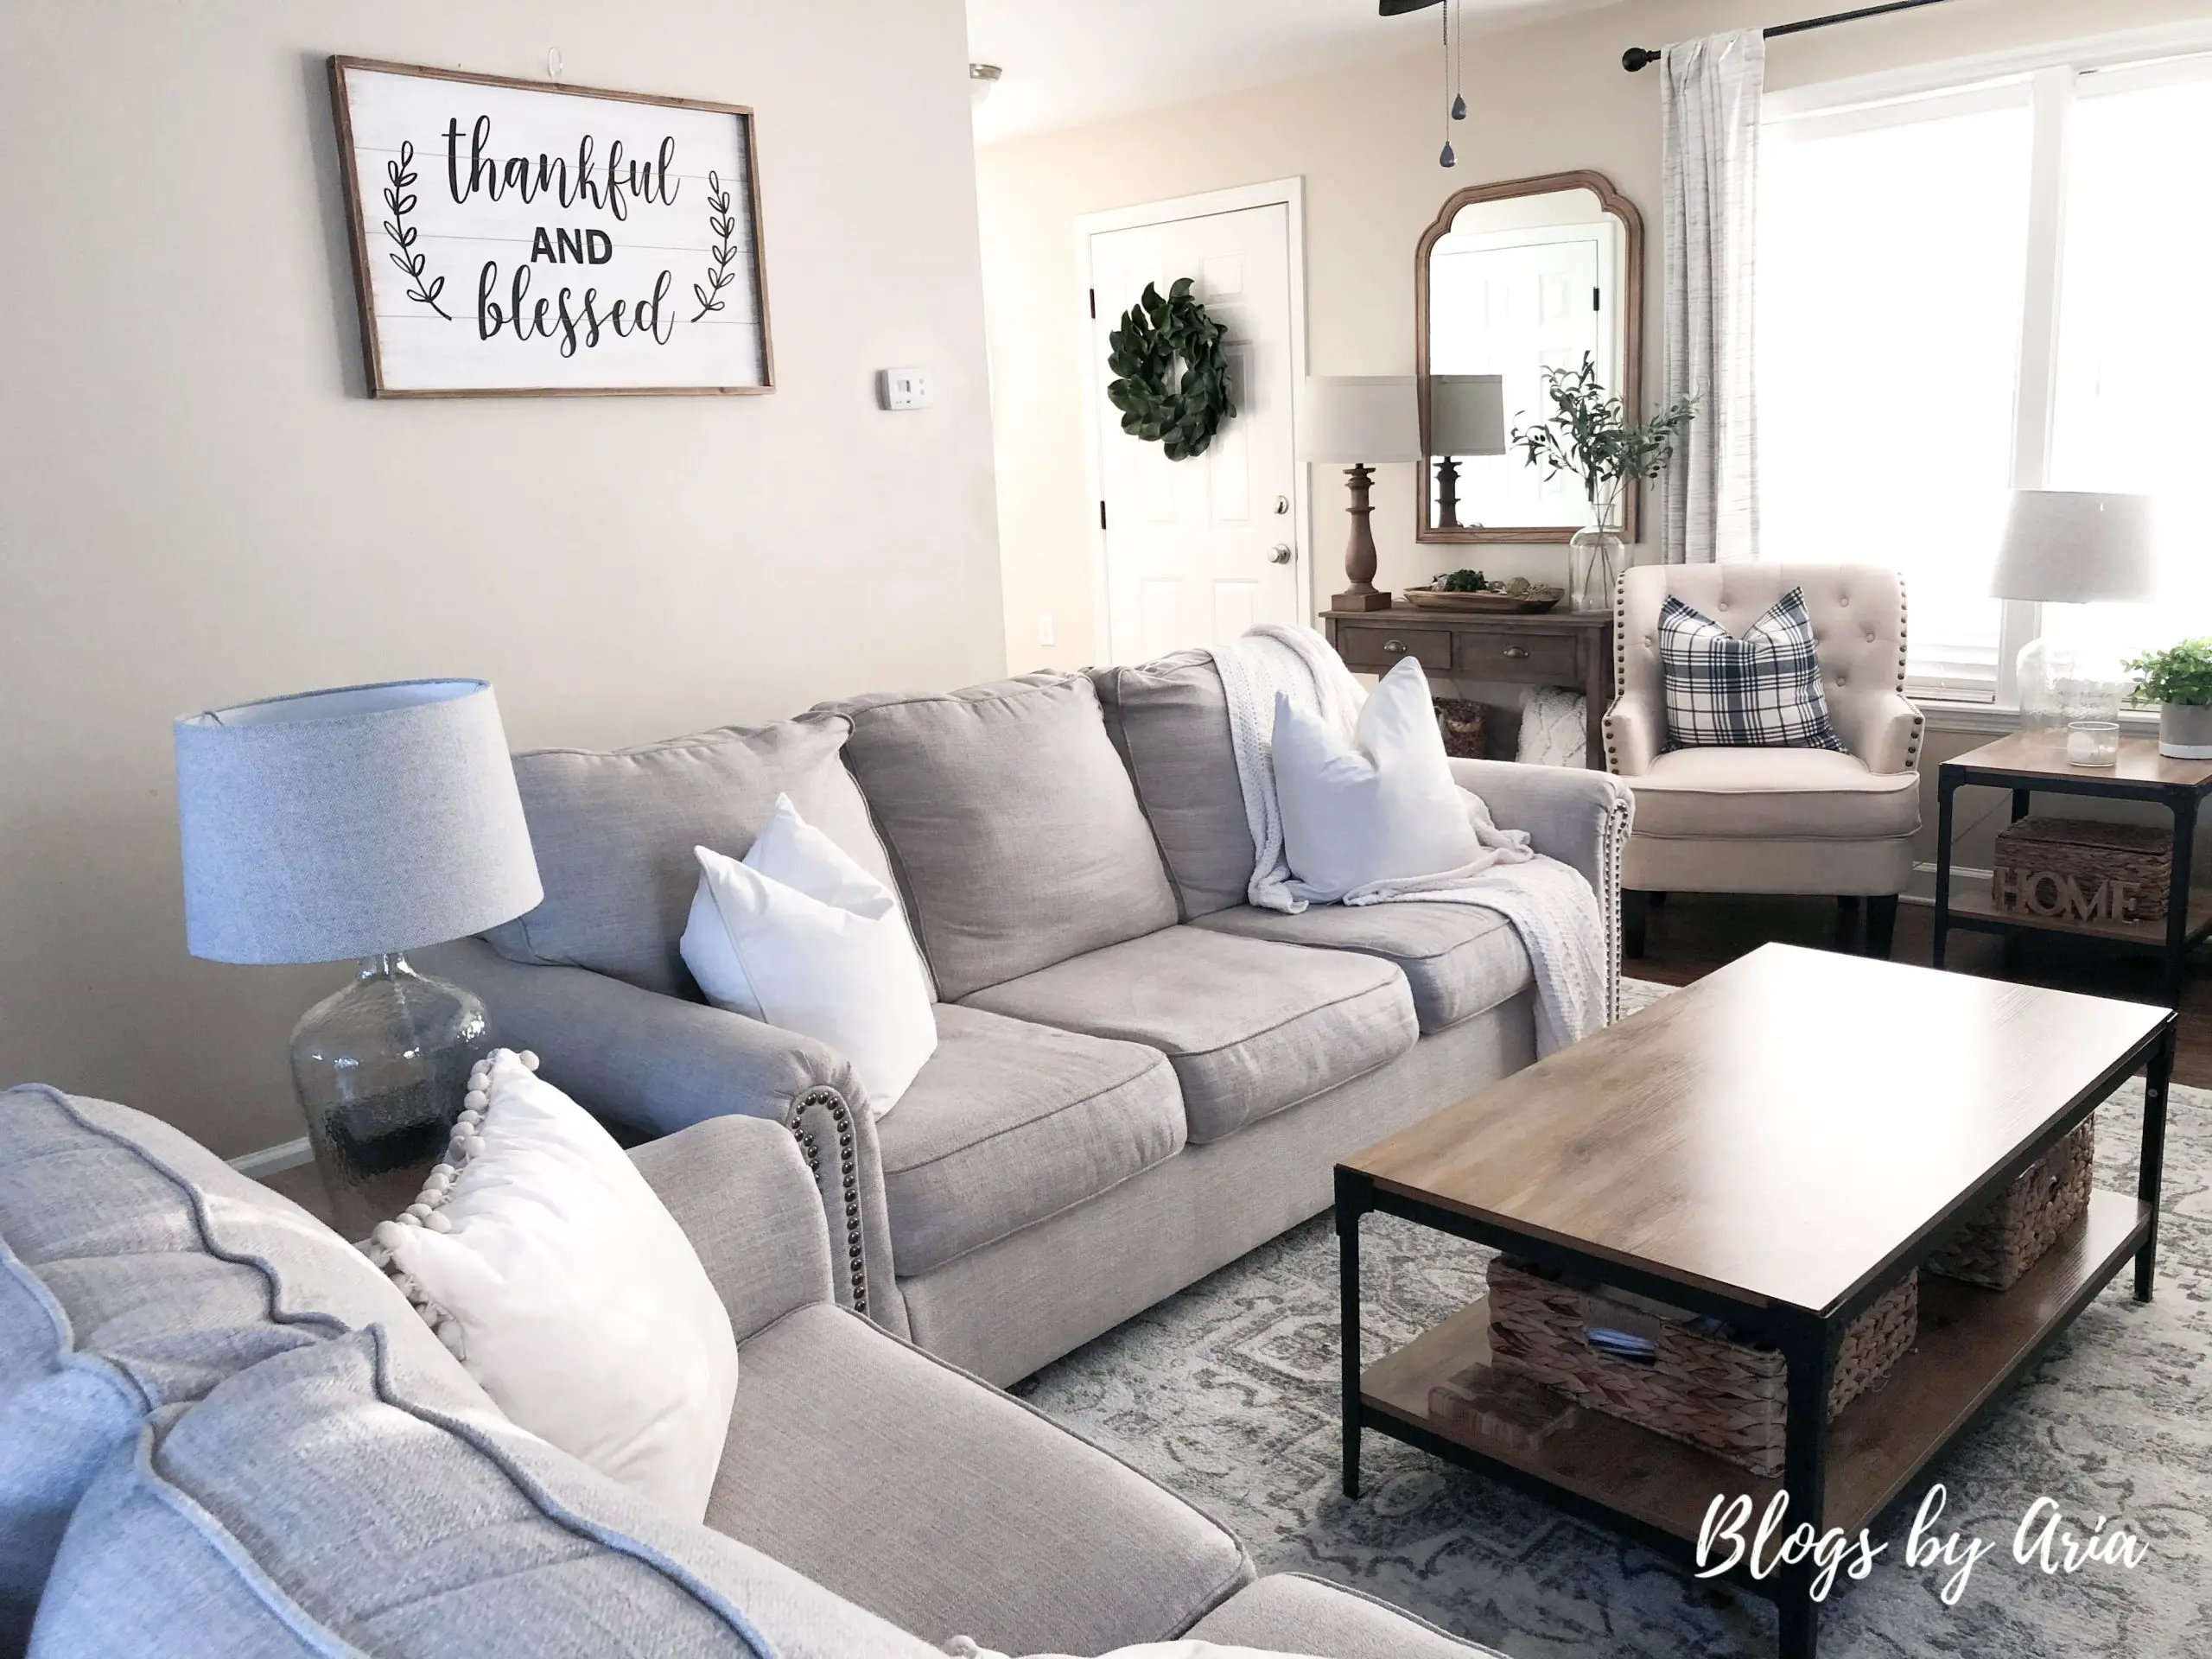 Living Room Decor Refresh - Blogs by Aria